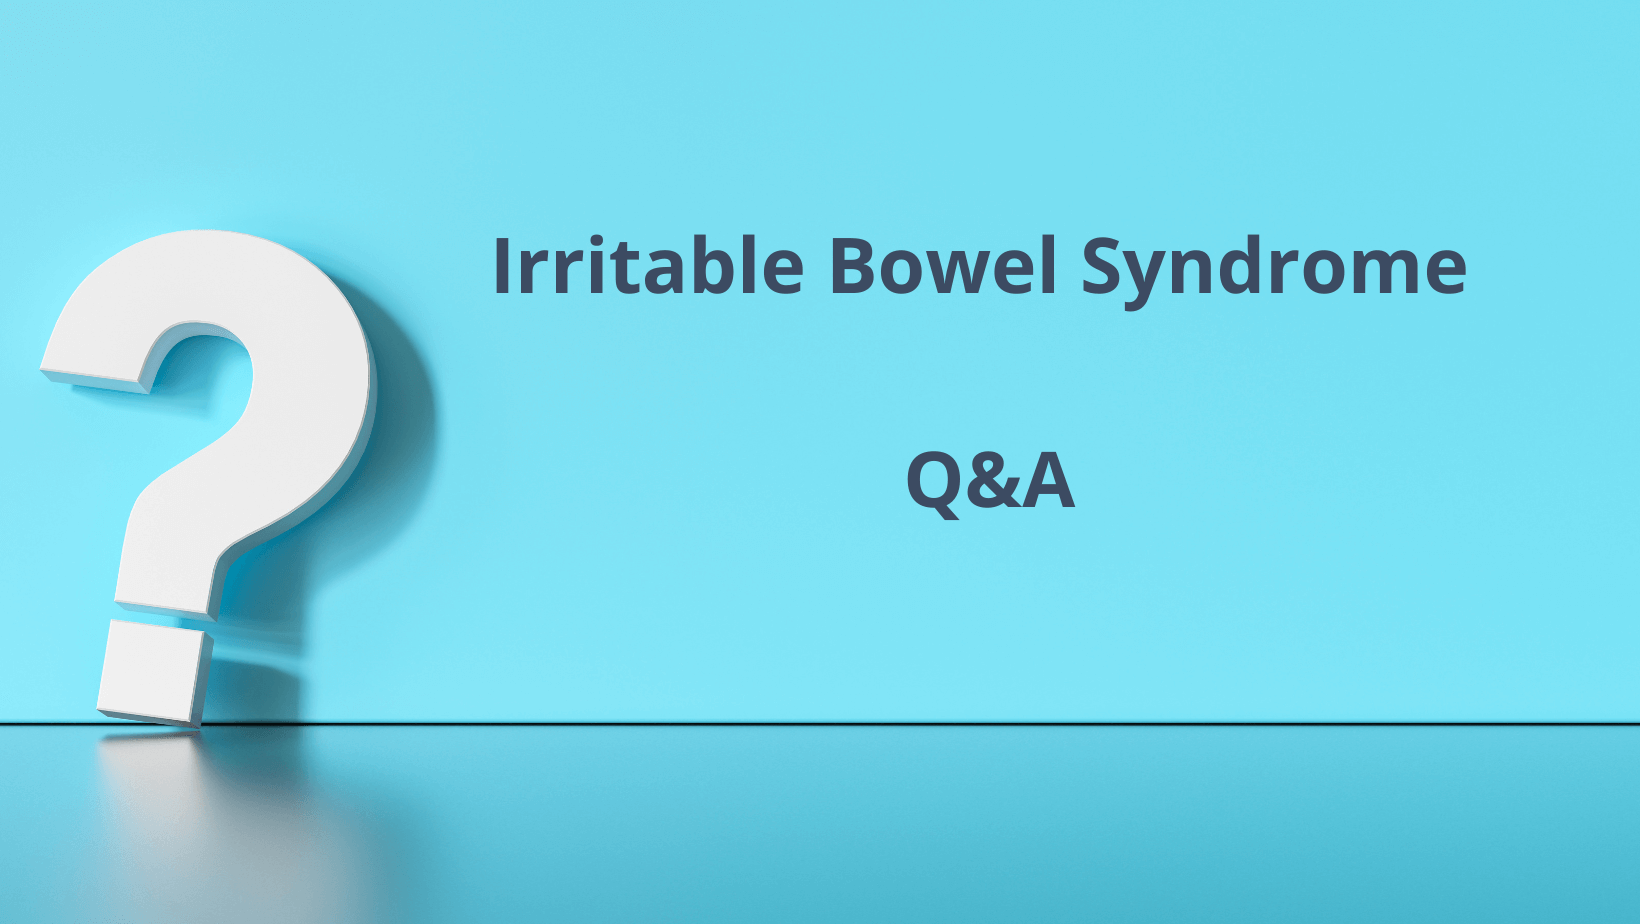 Questions and answers about IBS